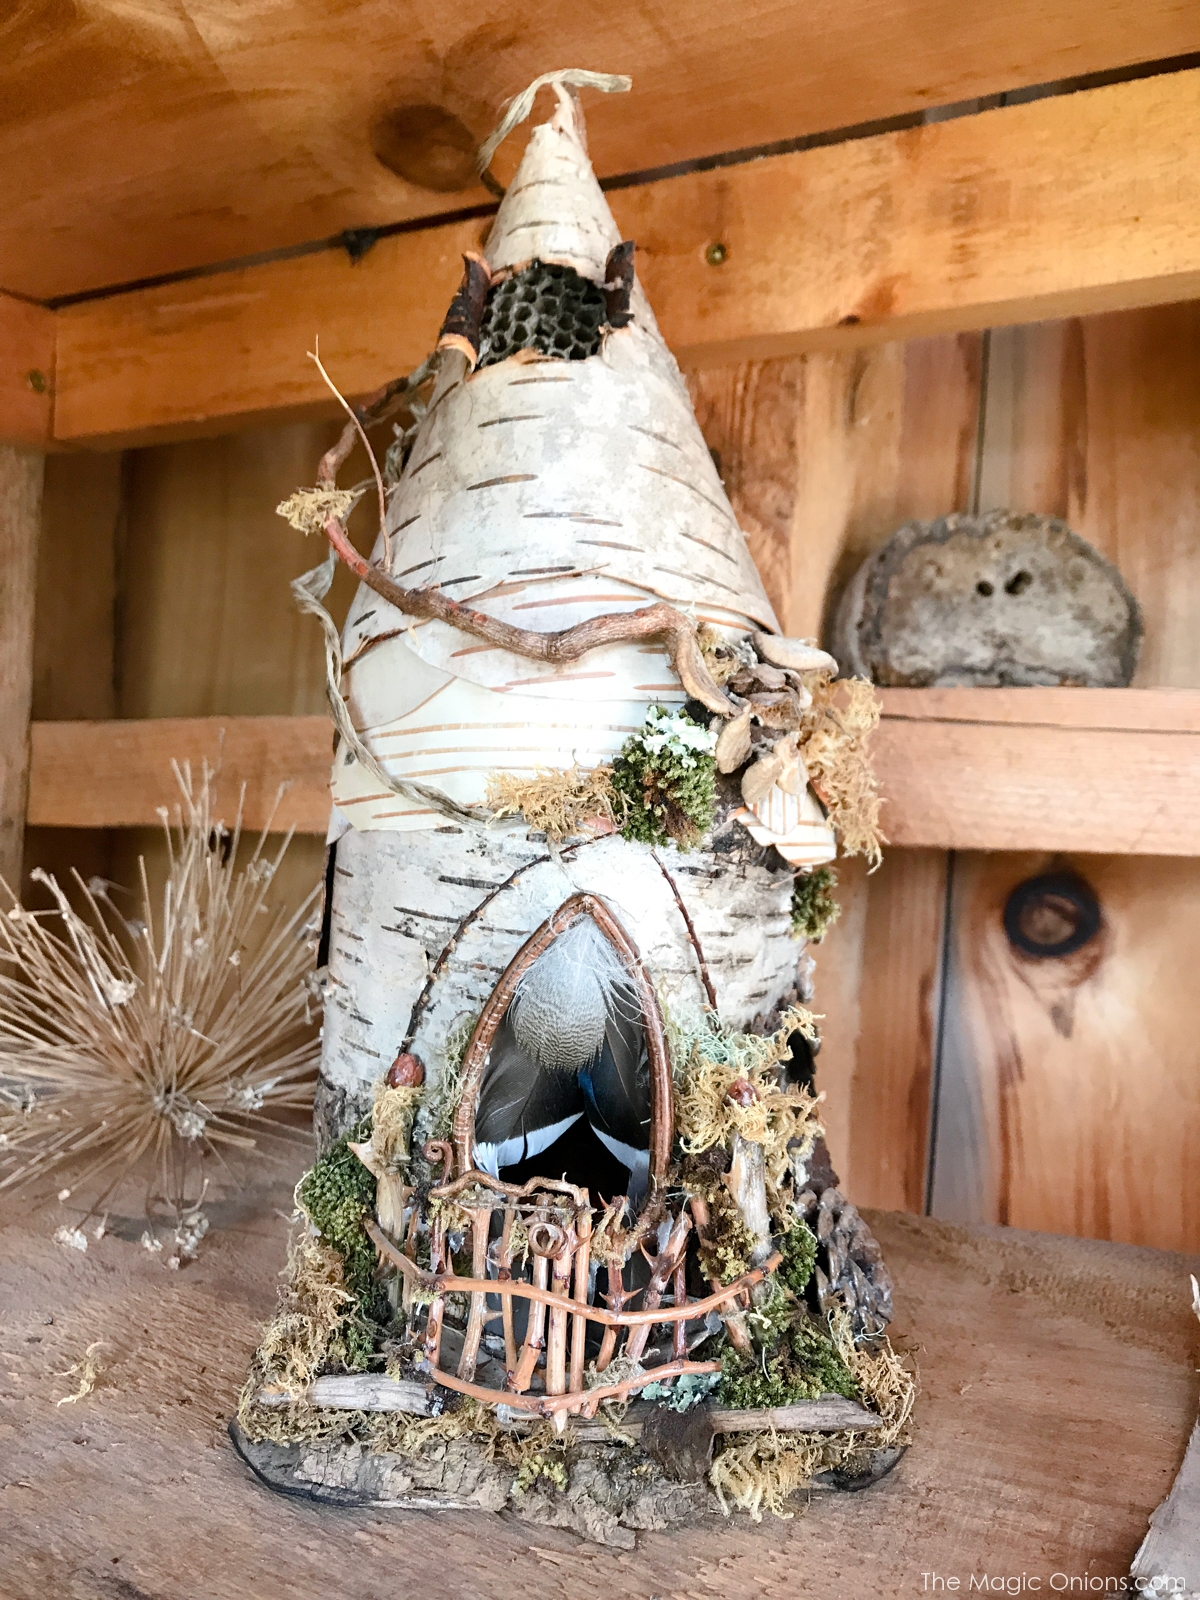 Fairy house from Magical Miniature Gardens and Homes by Donni Webber